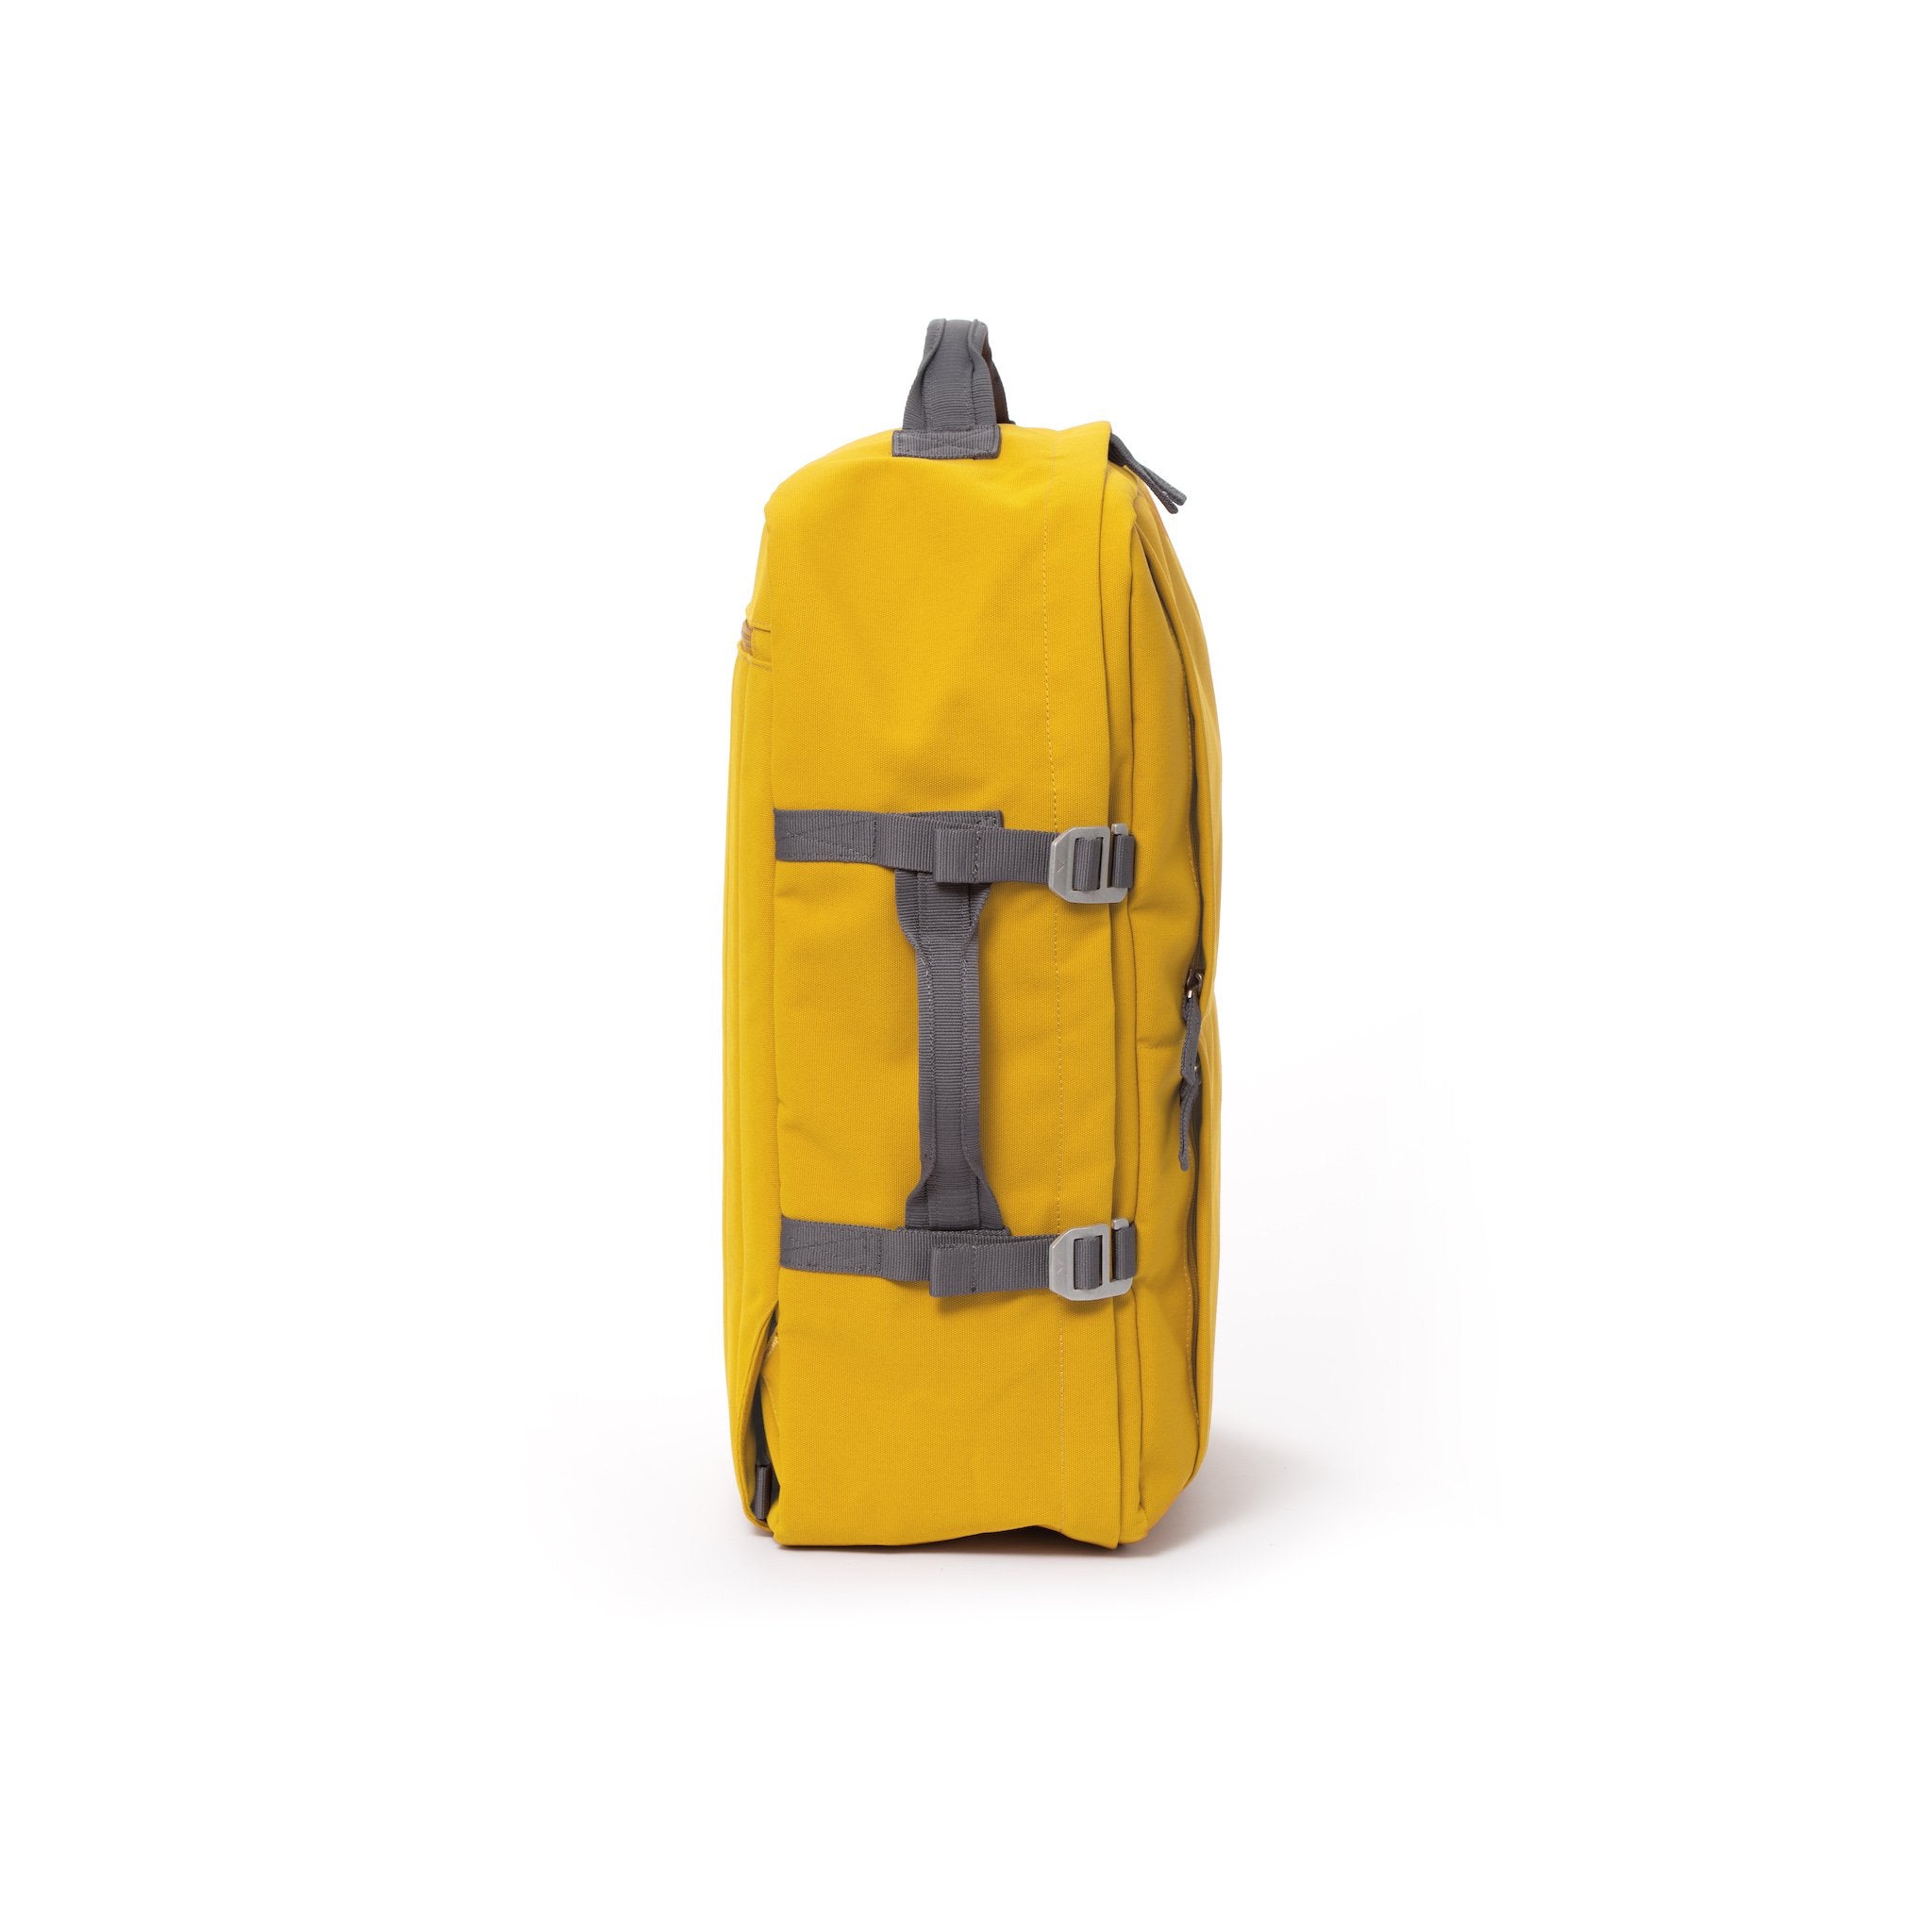 Yellow recycled canvas travel backpack with compression side straps.